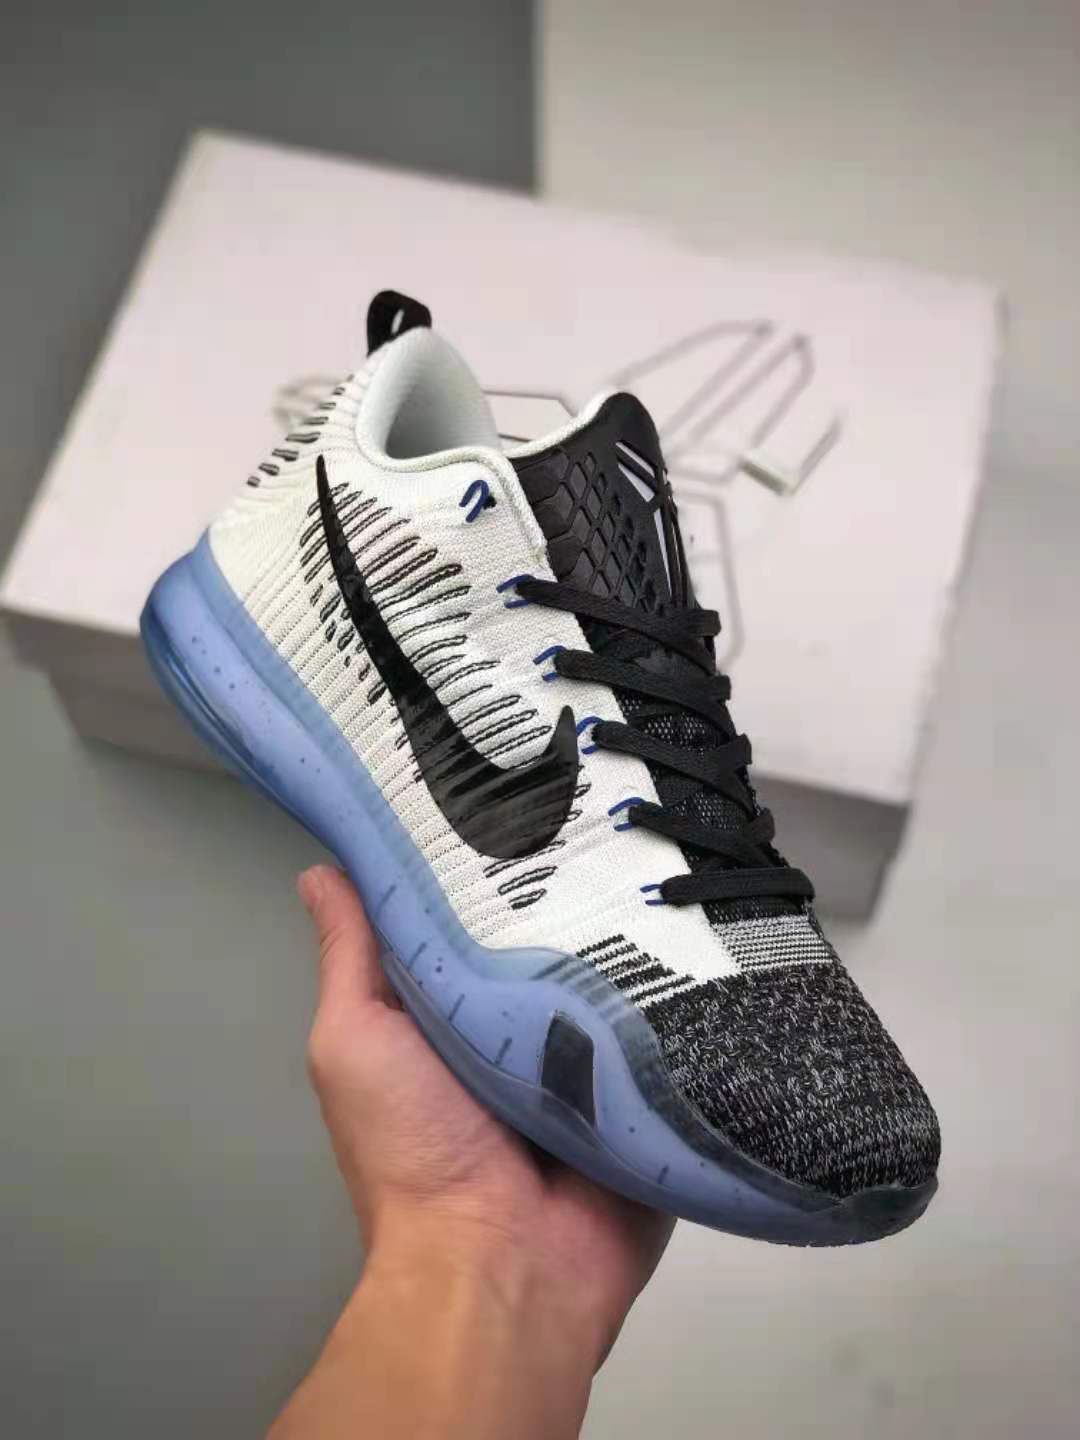 Kobe 10 Elite Low Prm Htm Shark Jaw White Black 805937-101 - Stylish and High-performance Basketball Sneakers